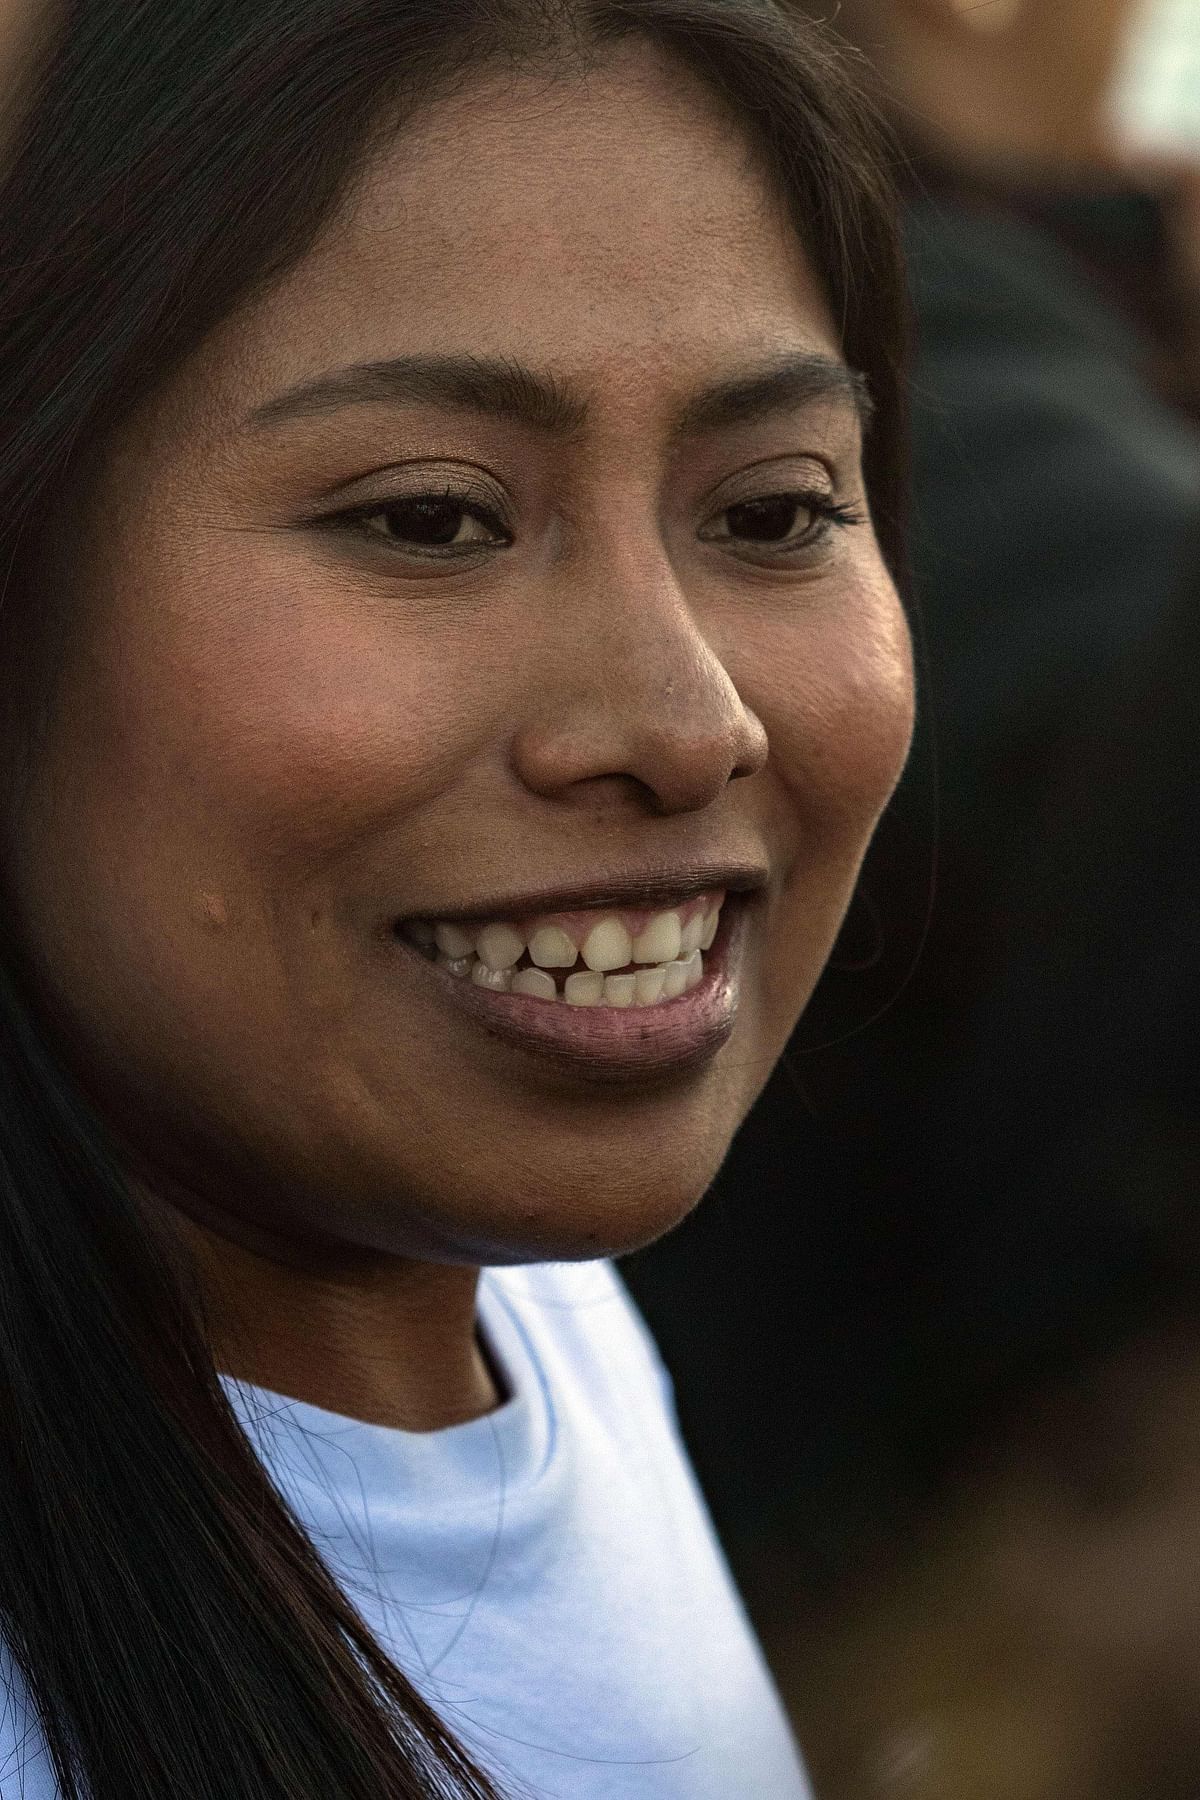 Mexican actress Yalitza Aparicio speaks to the media outside her trailer near the US-Mexico border where she is taking part in a production, in Tijuana, Baja California state, Mexico, on 22 January 2019. Aparicio, an indigenous Mexican woman, earned a best-actress nomination for the Oscars early Tuesday for her role in the Netflix film Roma. Photo: AFP